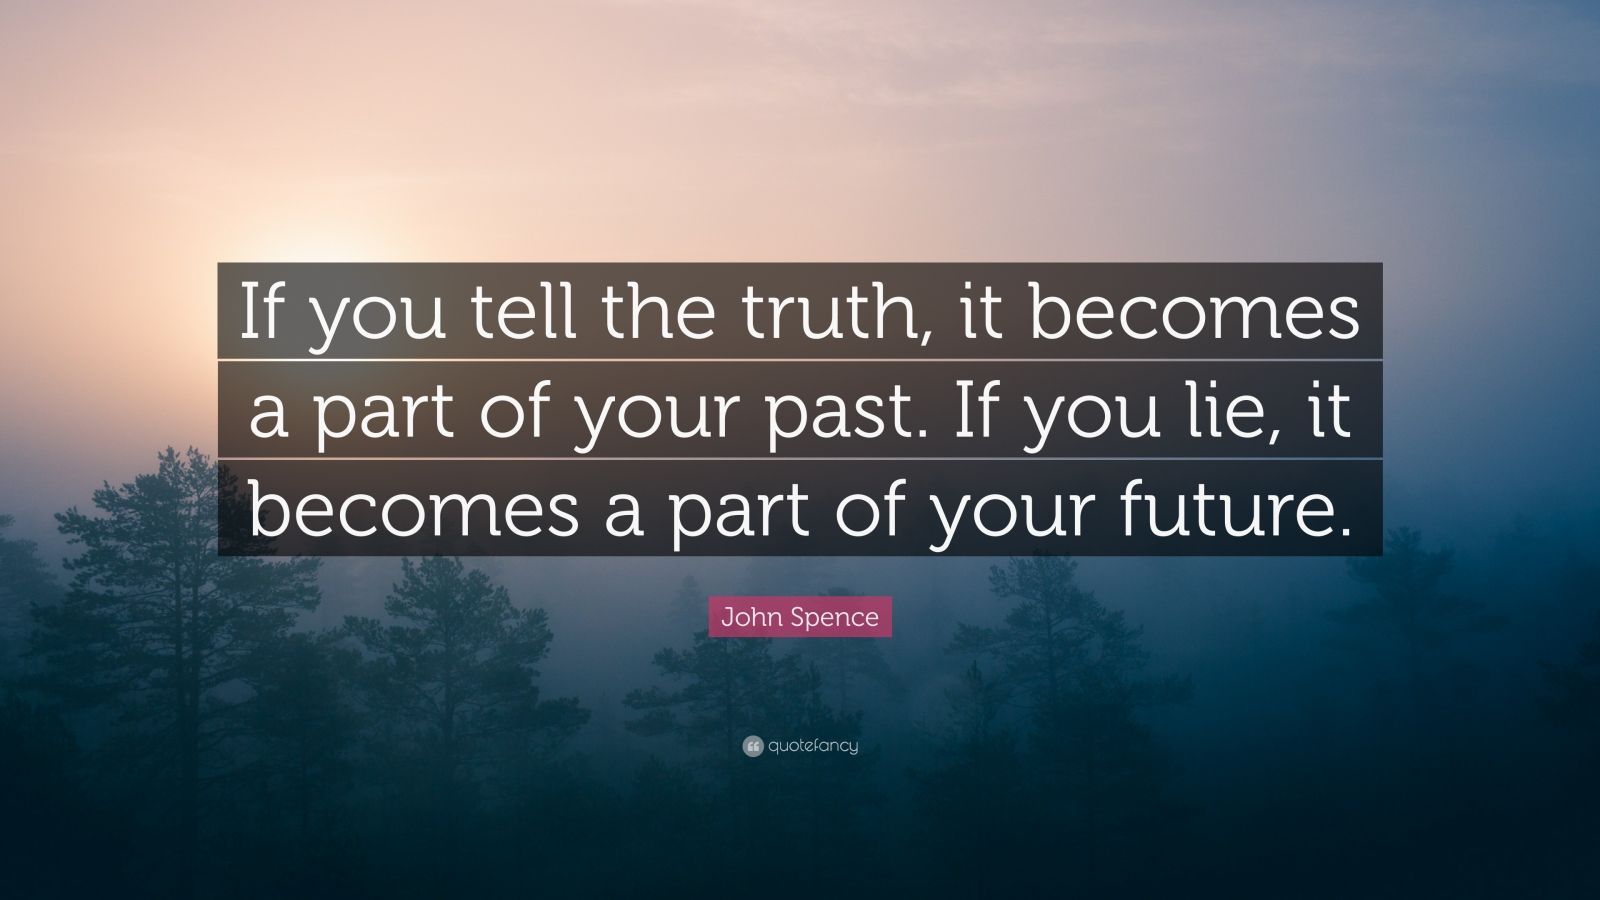 John Spence Quote: “If you tell the truth, it becomes a part of your